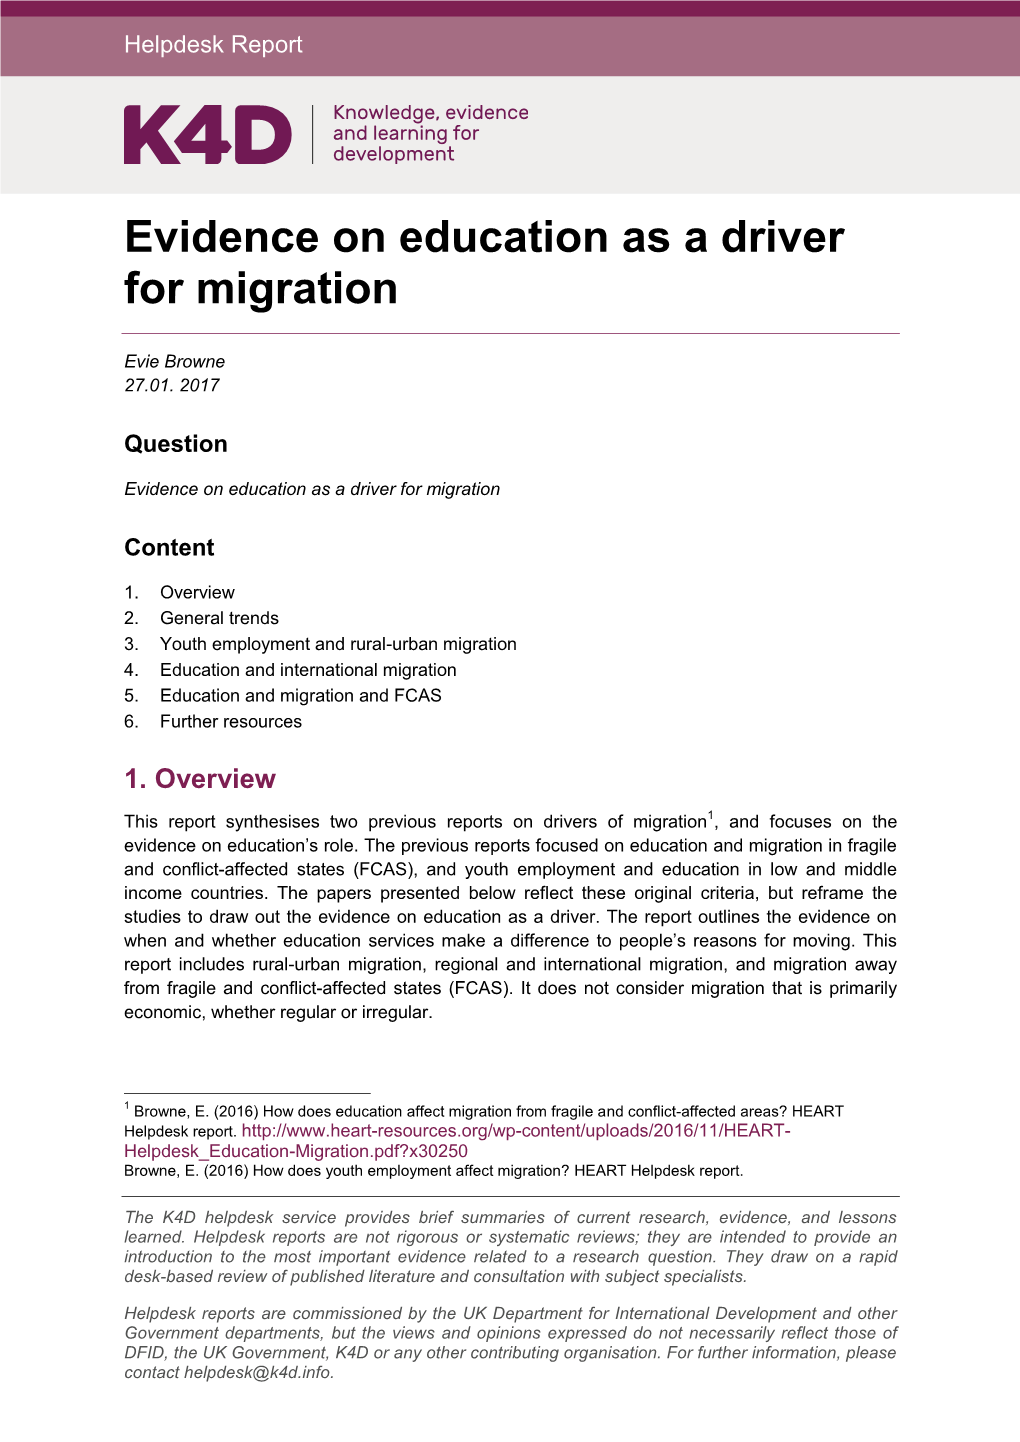 Evidence on Education As a Driver for Migration